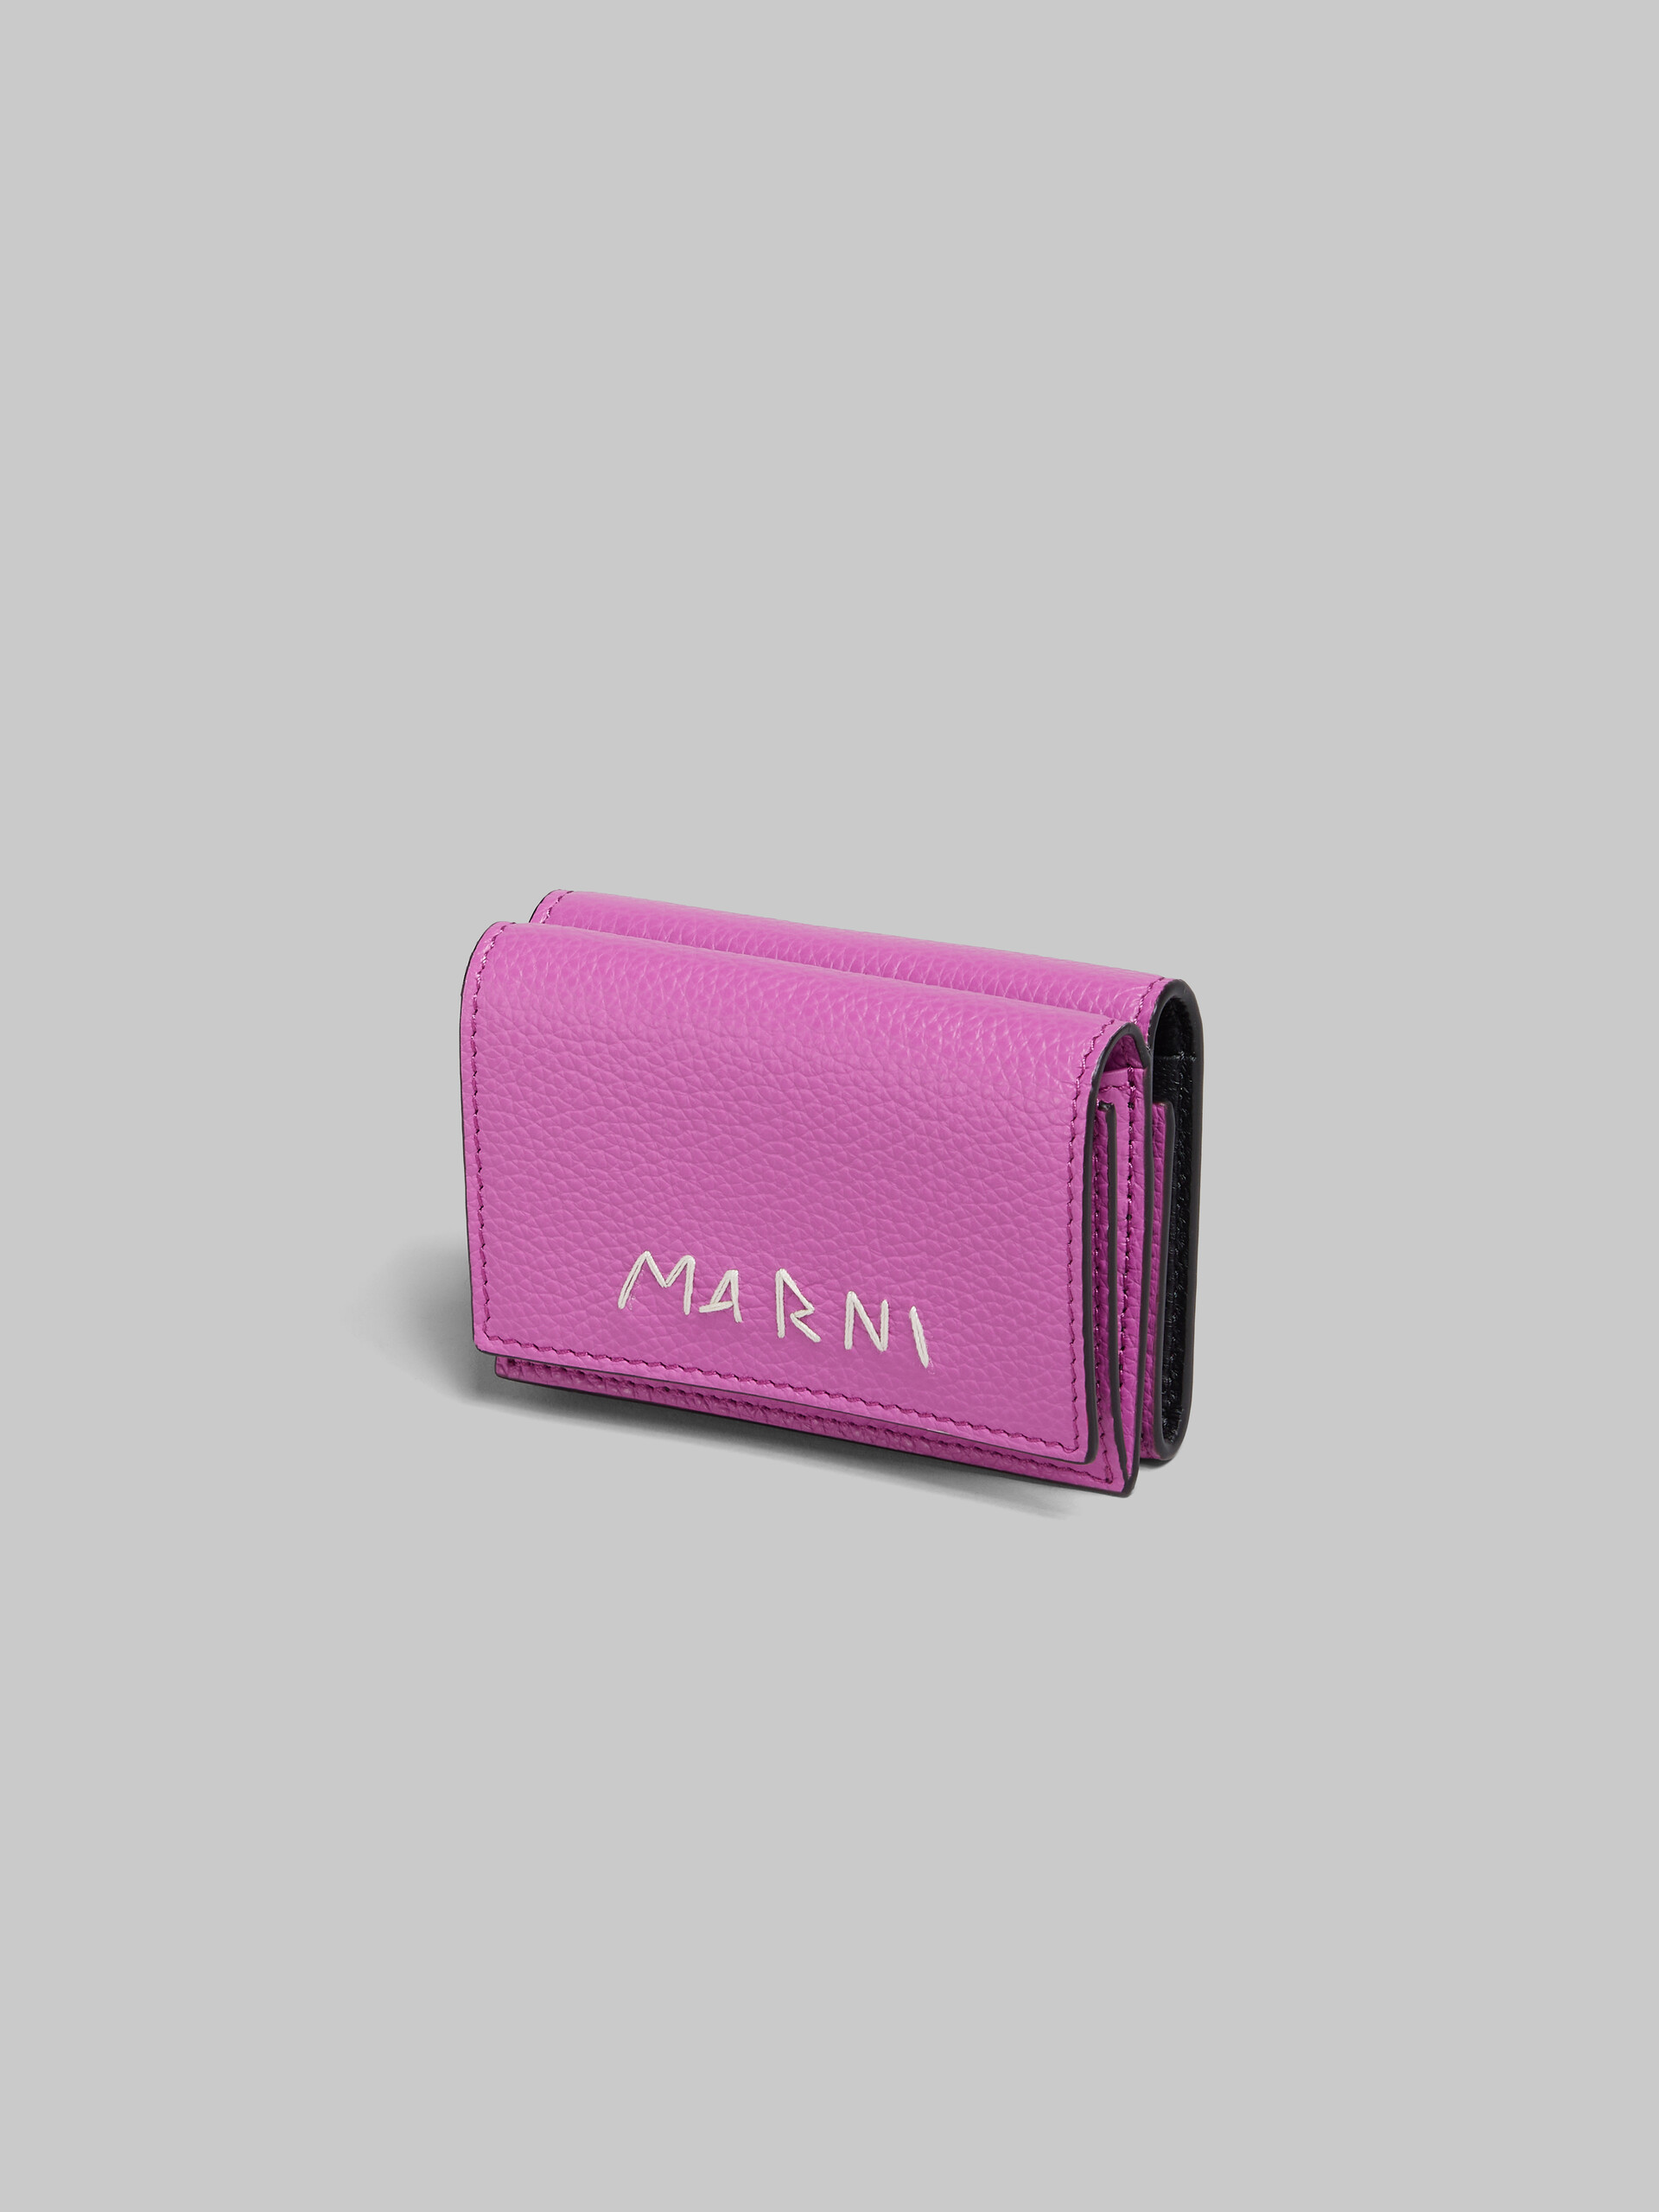 Pink leather trifold wallet with Marni mending - Wallets - Image 4